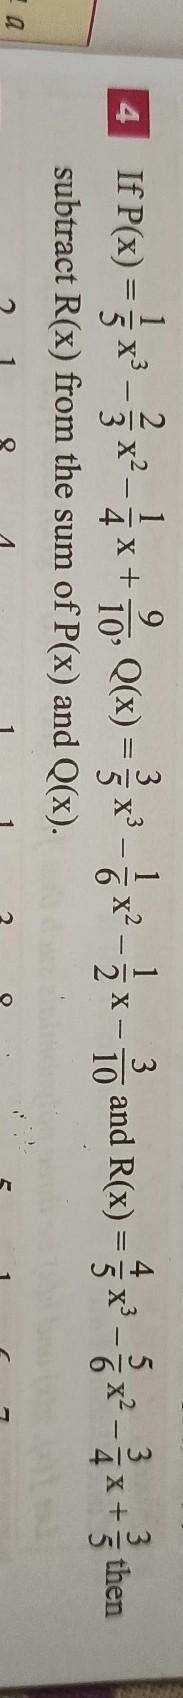 No.4 please solve this ..​